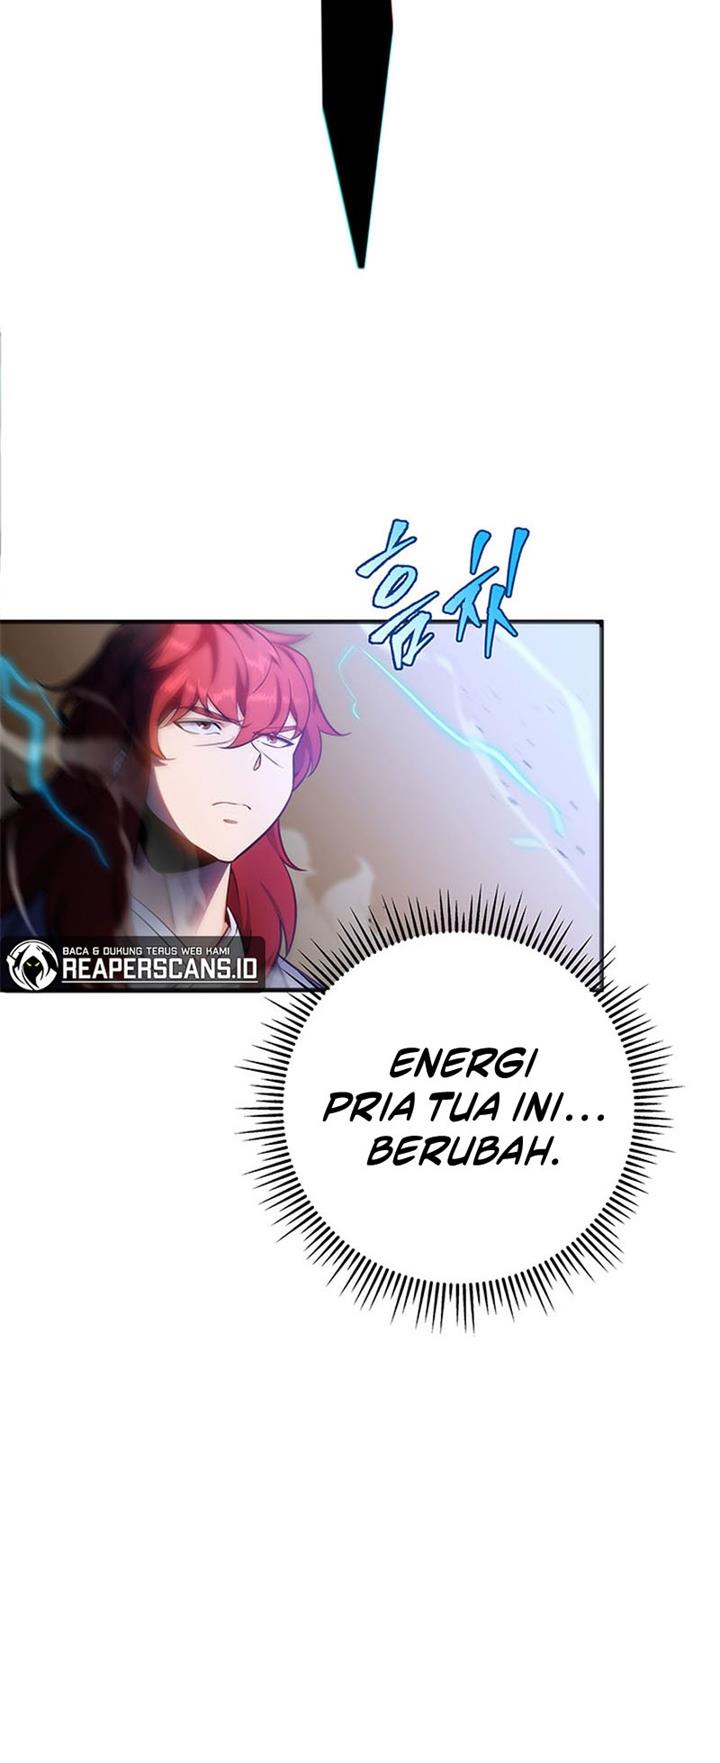 Heavenly Inquisition Sword Chapter 21